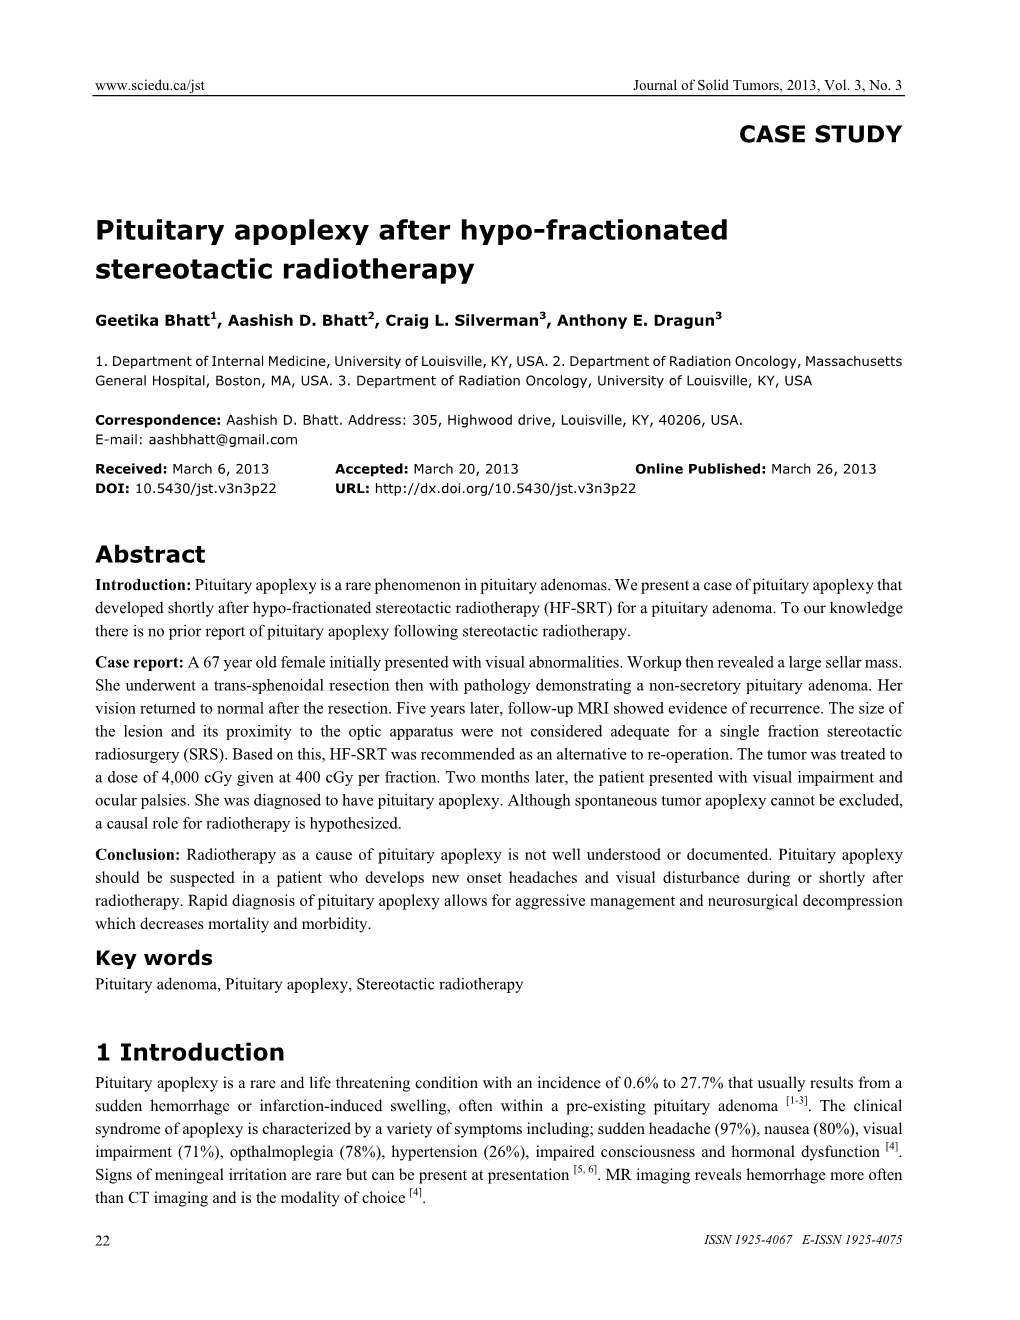 Pituitary Apoplexy After Hypo-Fractionated Stereotactic Radiotherapy